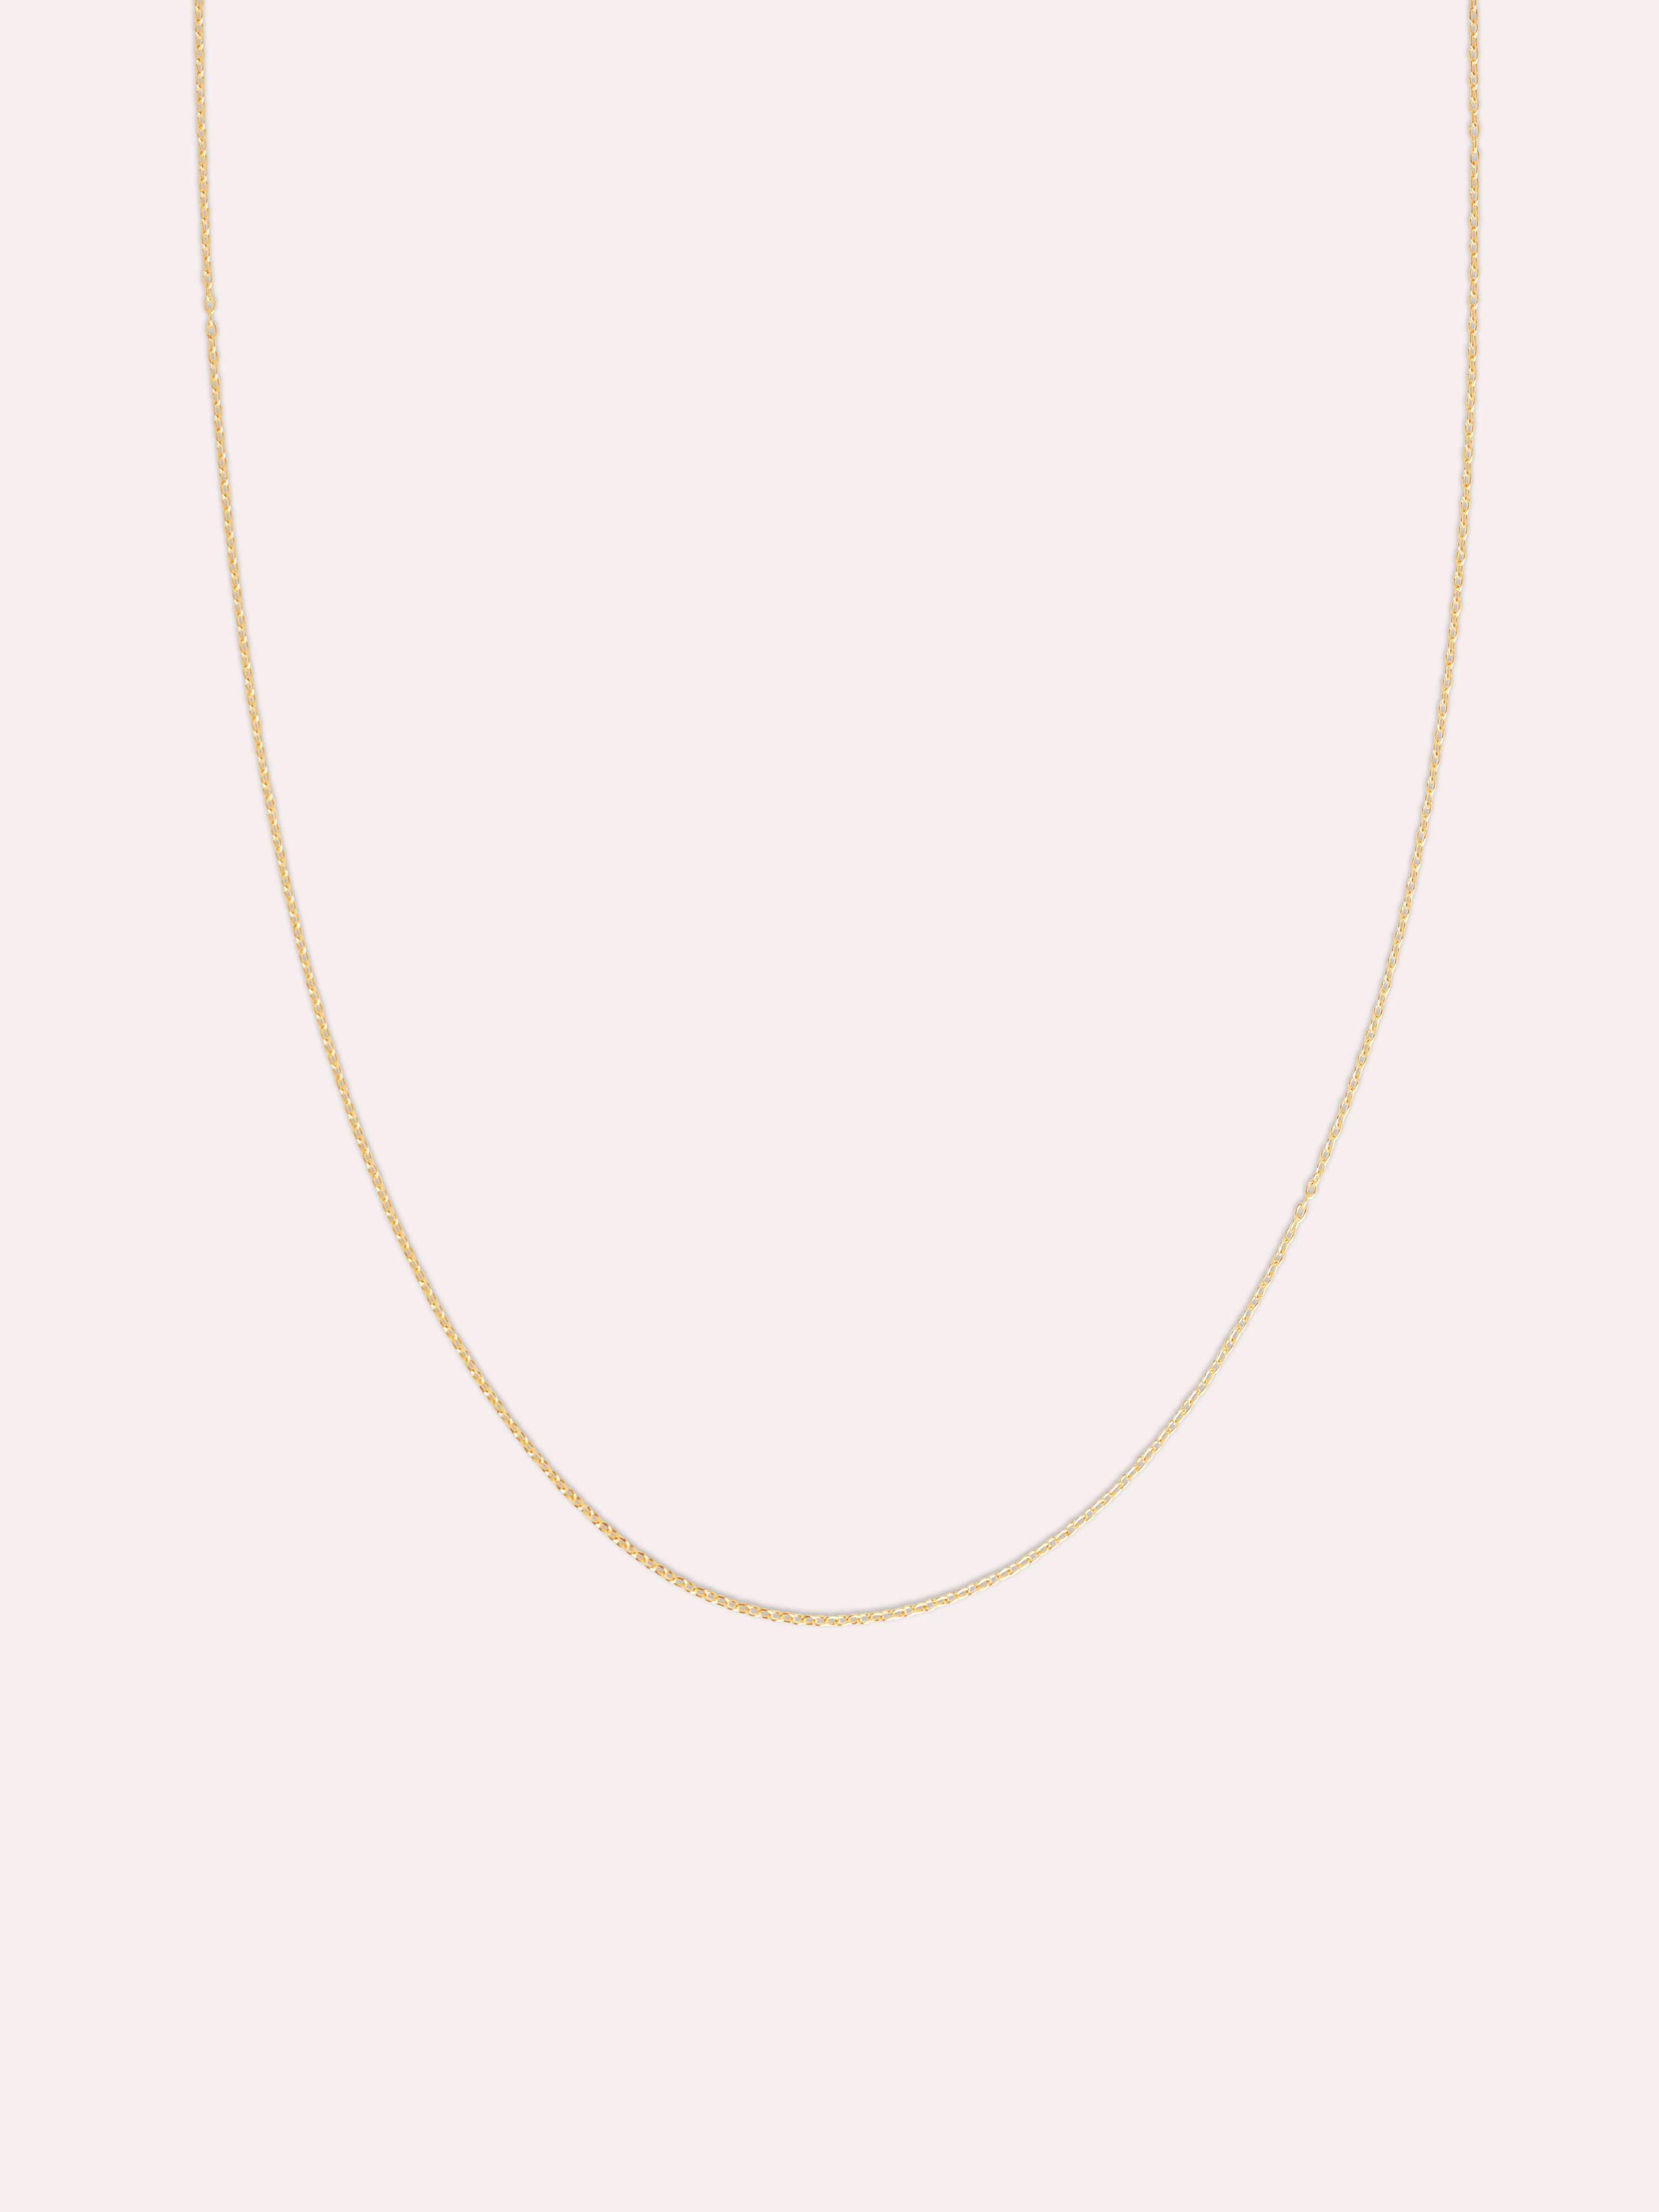 Everything Gold Necklace